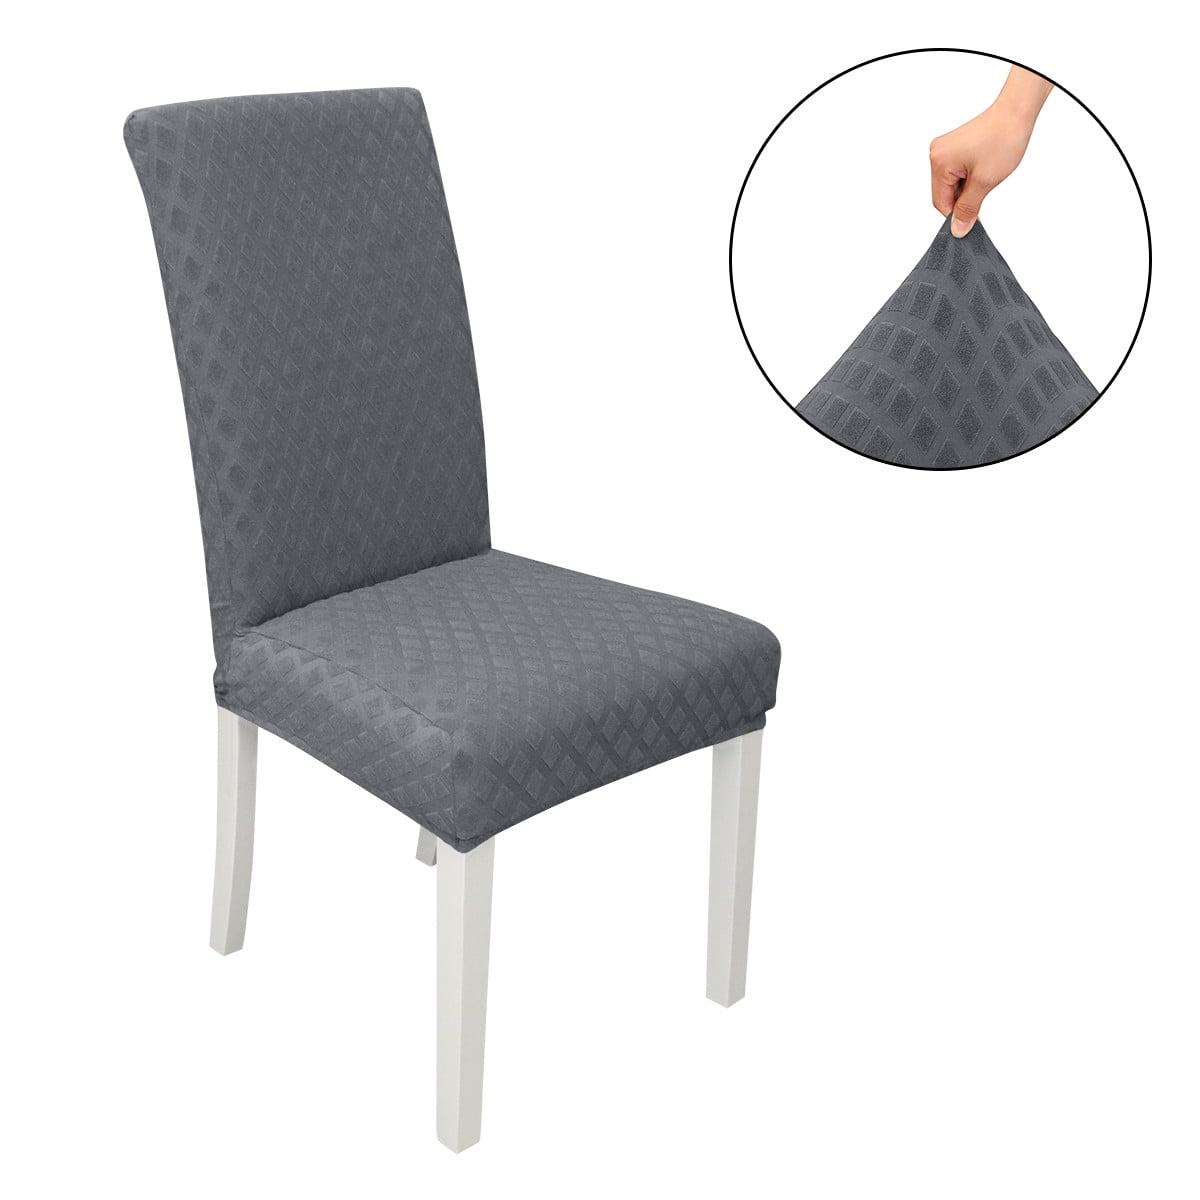 Details about   Large Solid Spandex Stretch Dining Room Seat Covers Wedding Banquet Slipcovers